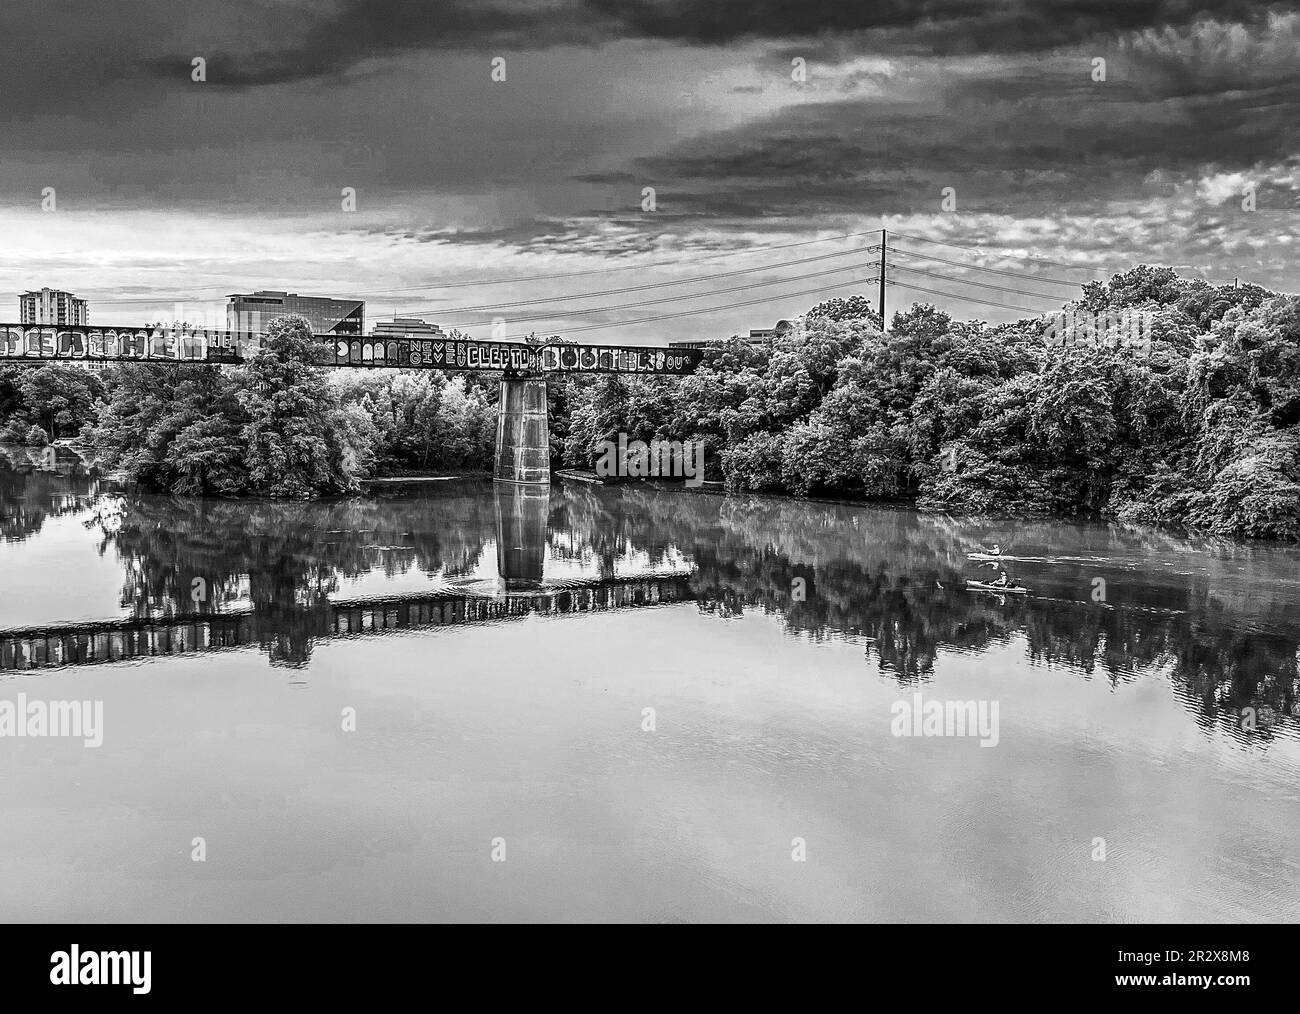 Urban nature Black and White Stock Photos & Images - Alamy